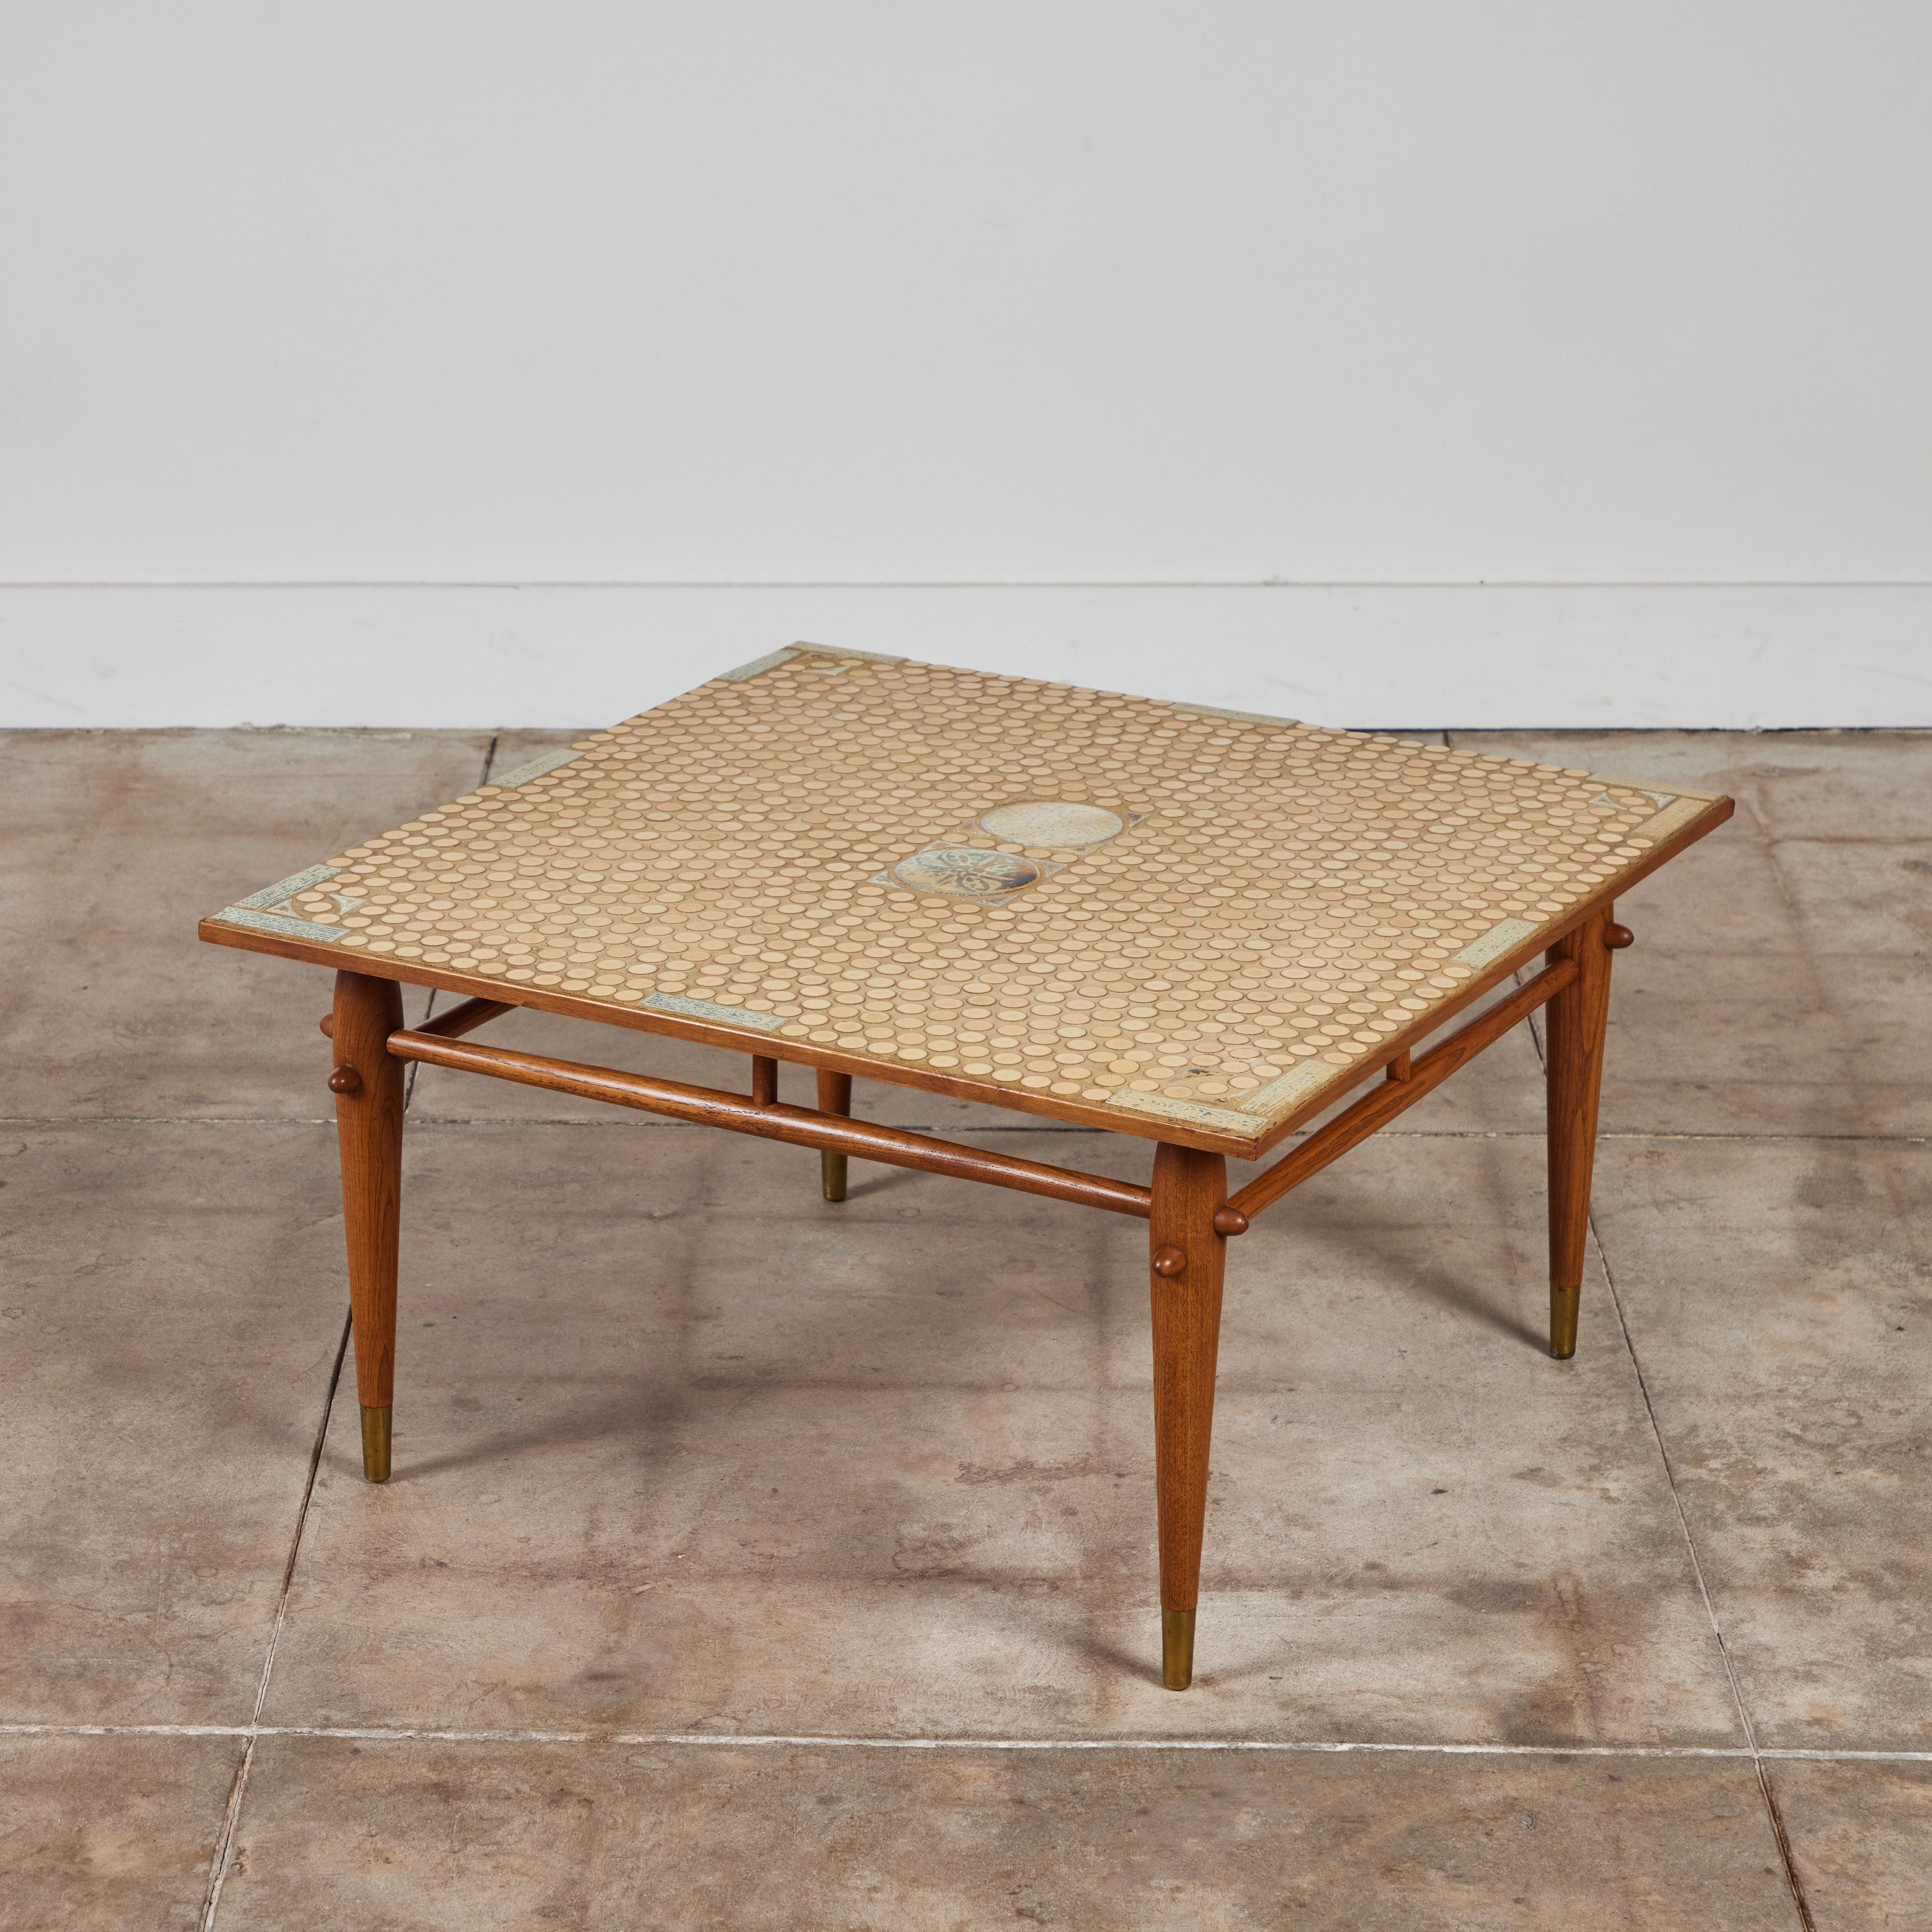 Tile topped coffee table in the style of Tue Poulsen and Gordon and Jane Martz. The table features muted tone round, triangular and rectangular tiles. The square oak frame has four dowel tapered legs connected by oak stretchers near the table